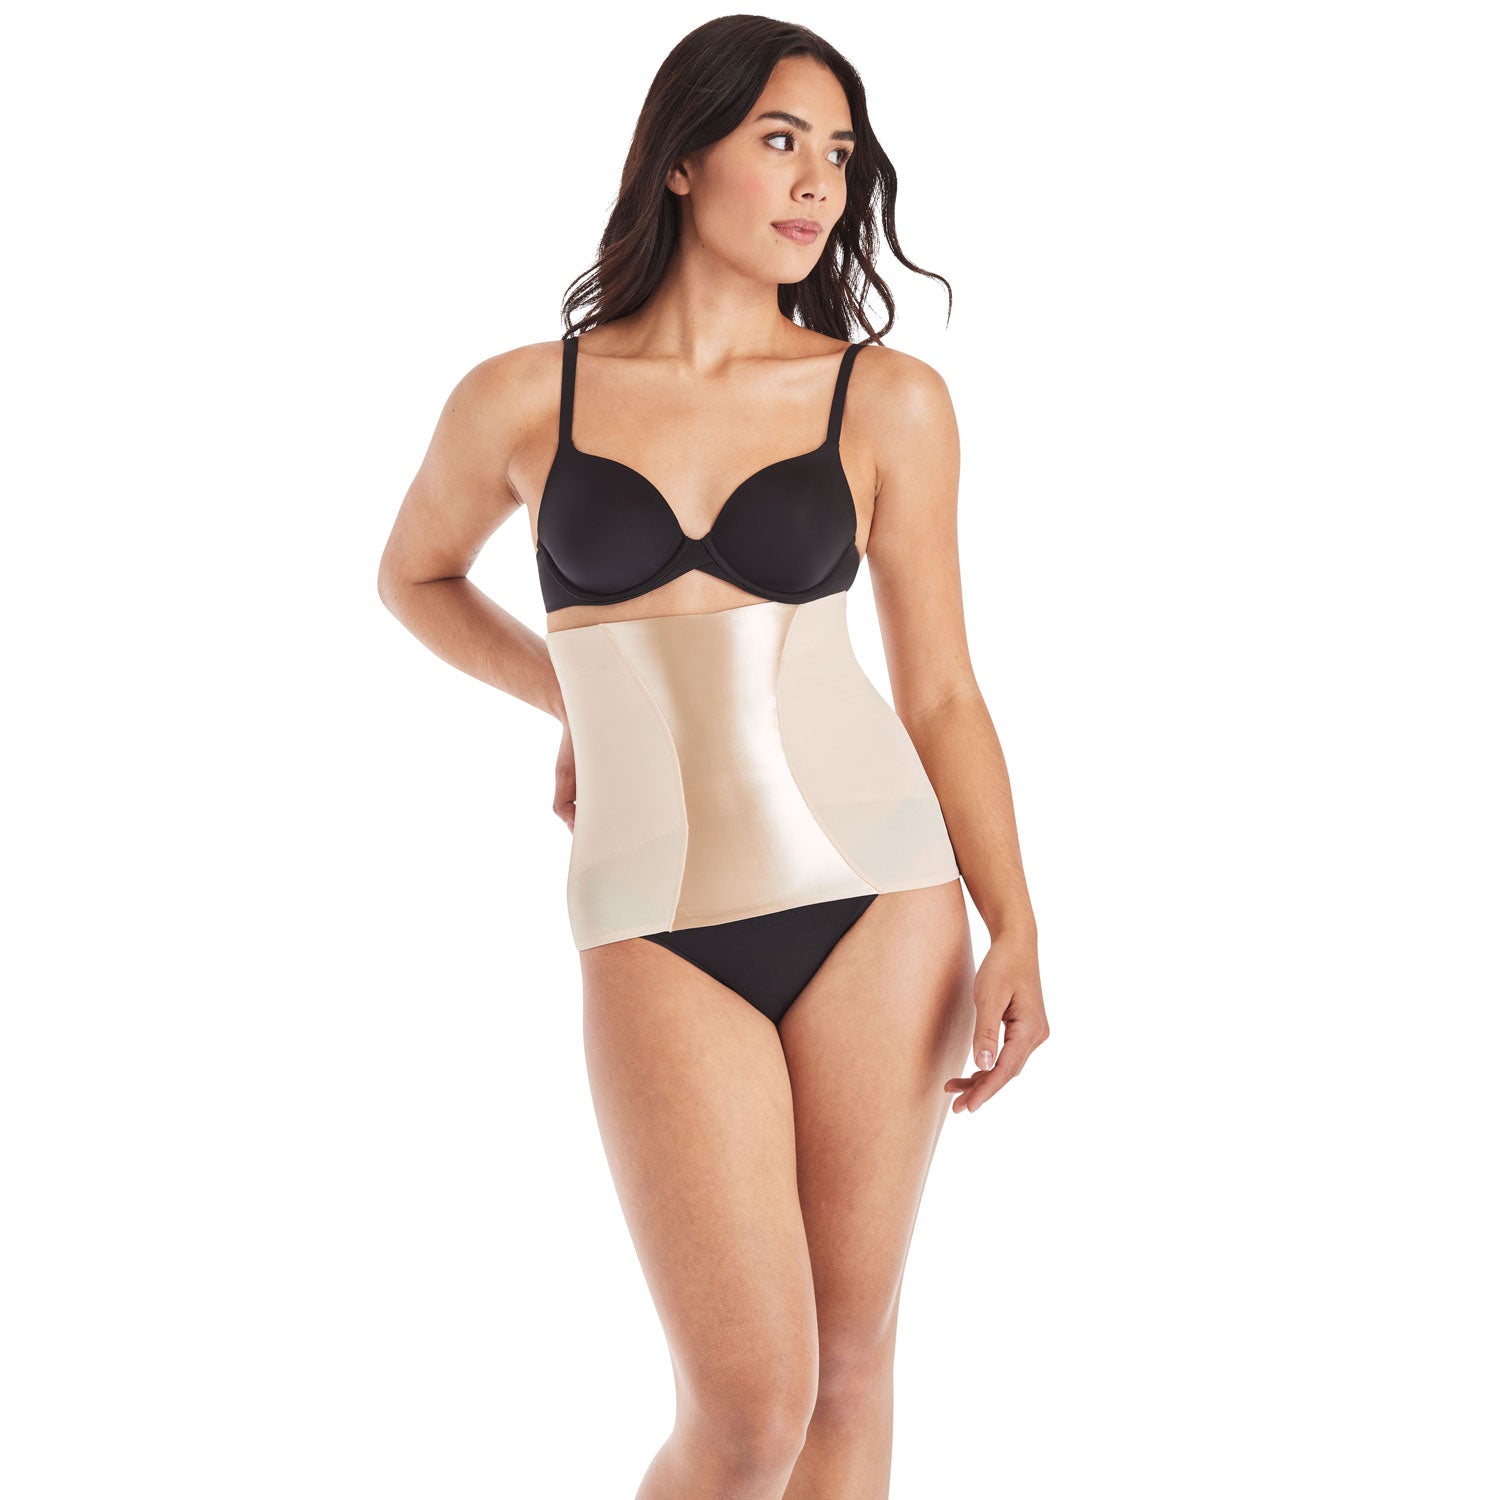 Farmacell BodyShaper 605S Invisible shaping girdle Sweden